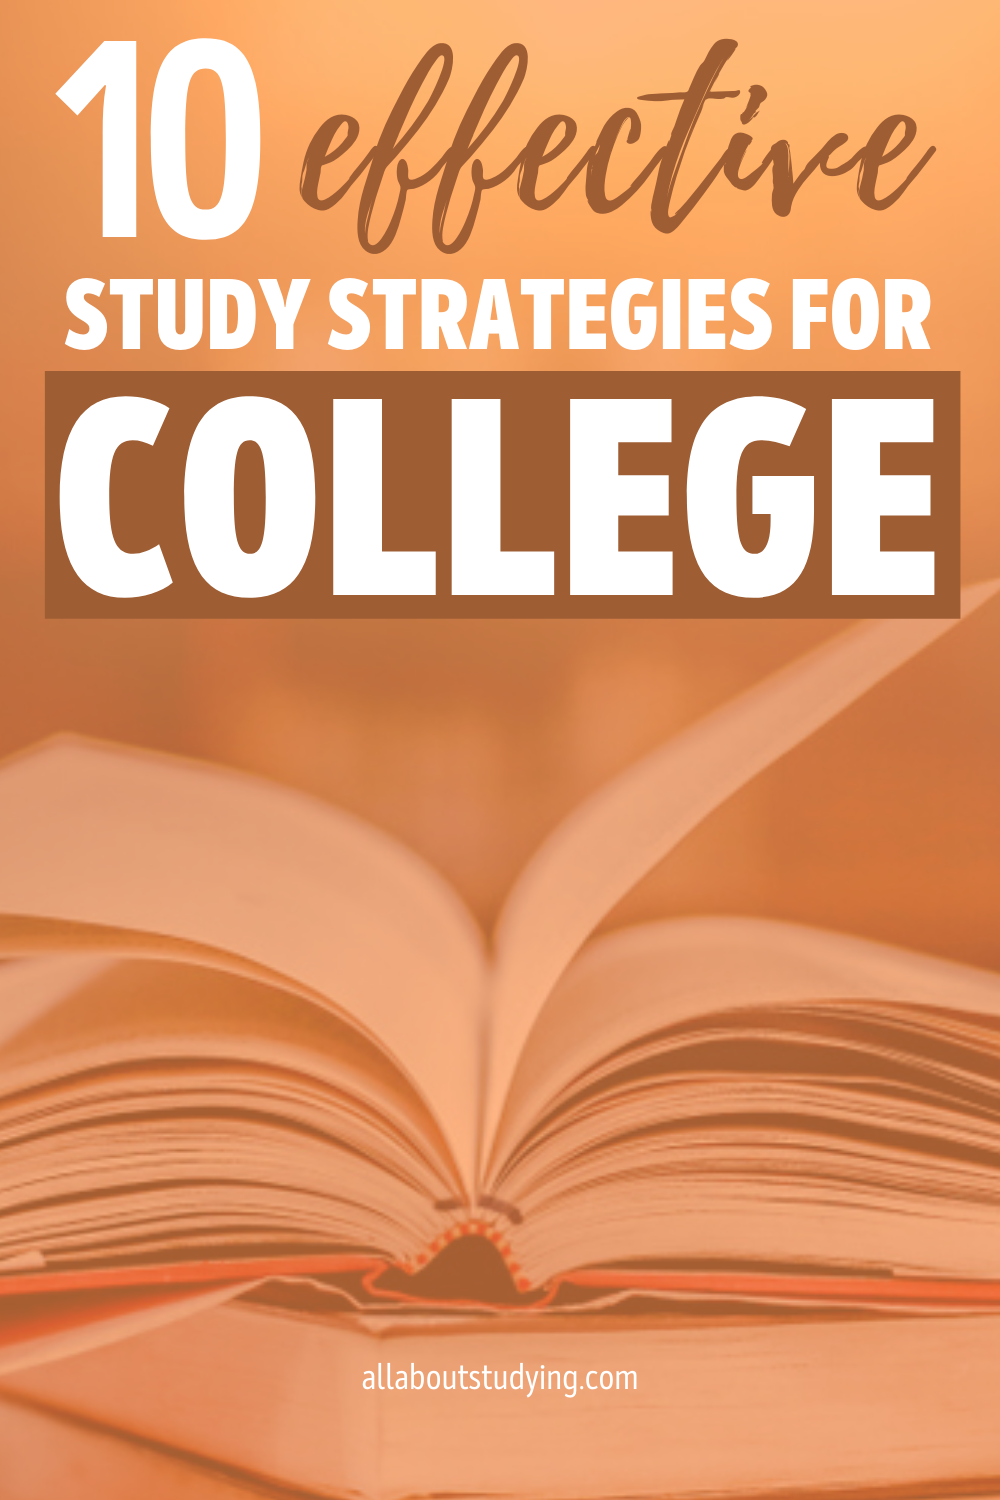 How To Study Well In College_ 10 Study Strategies For College Students #studying #collegelife #college #studytips #studystrategies